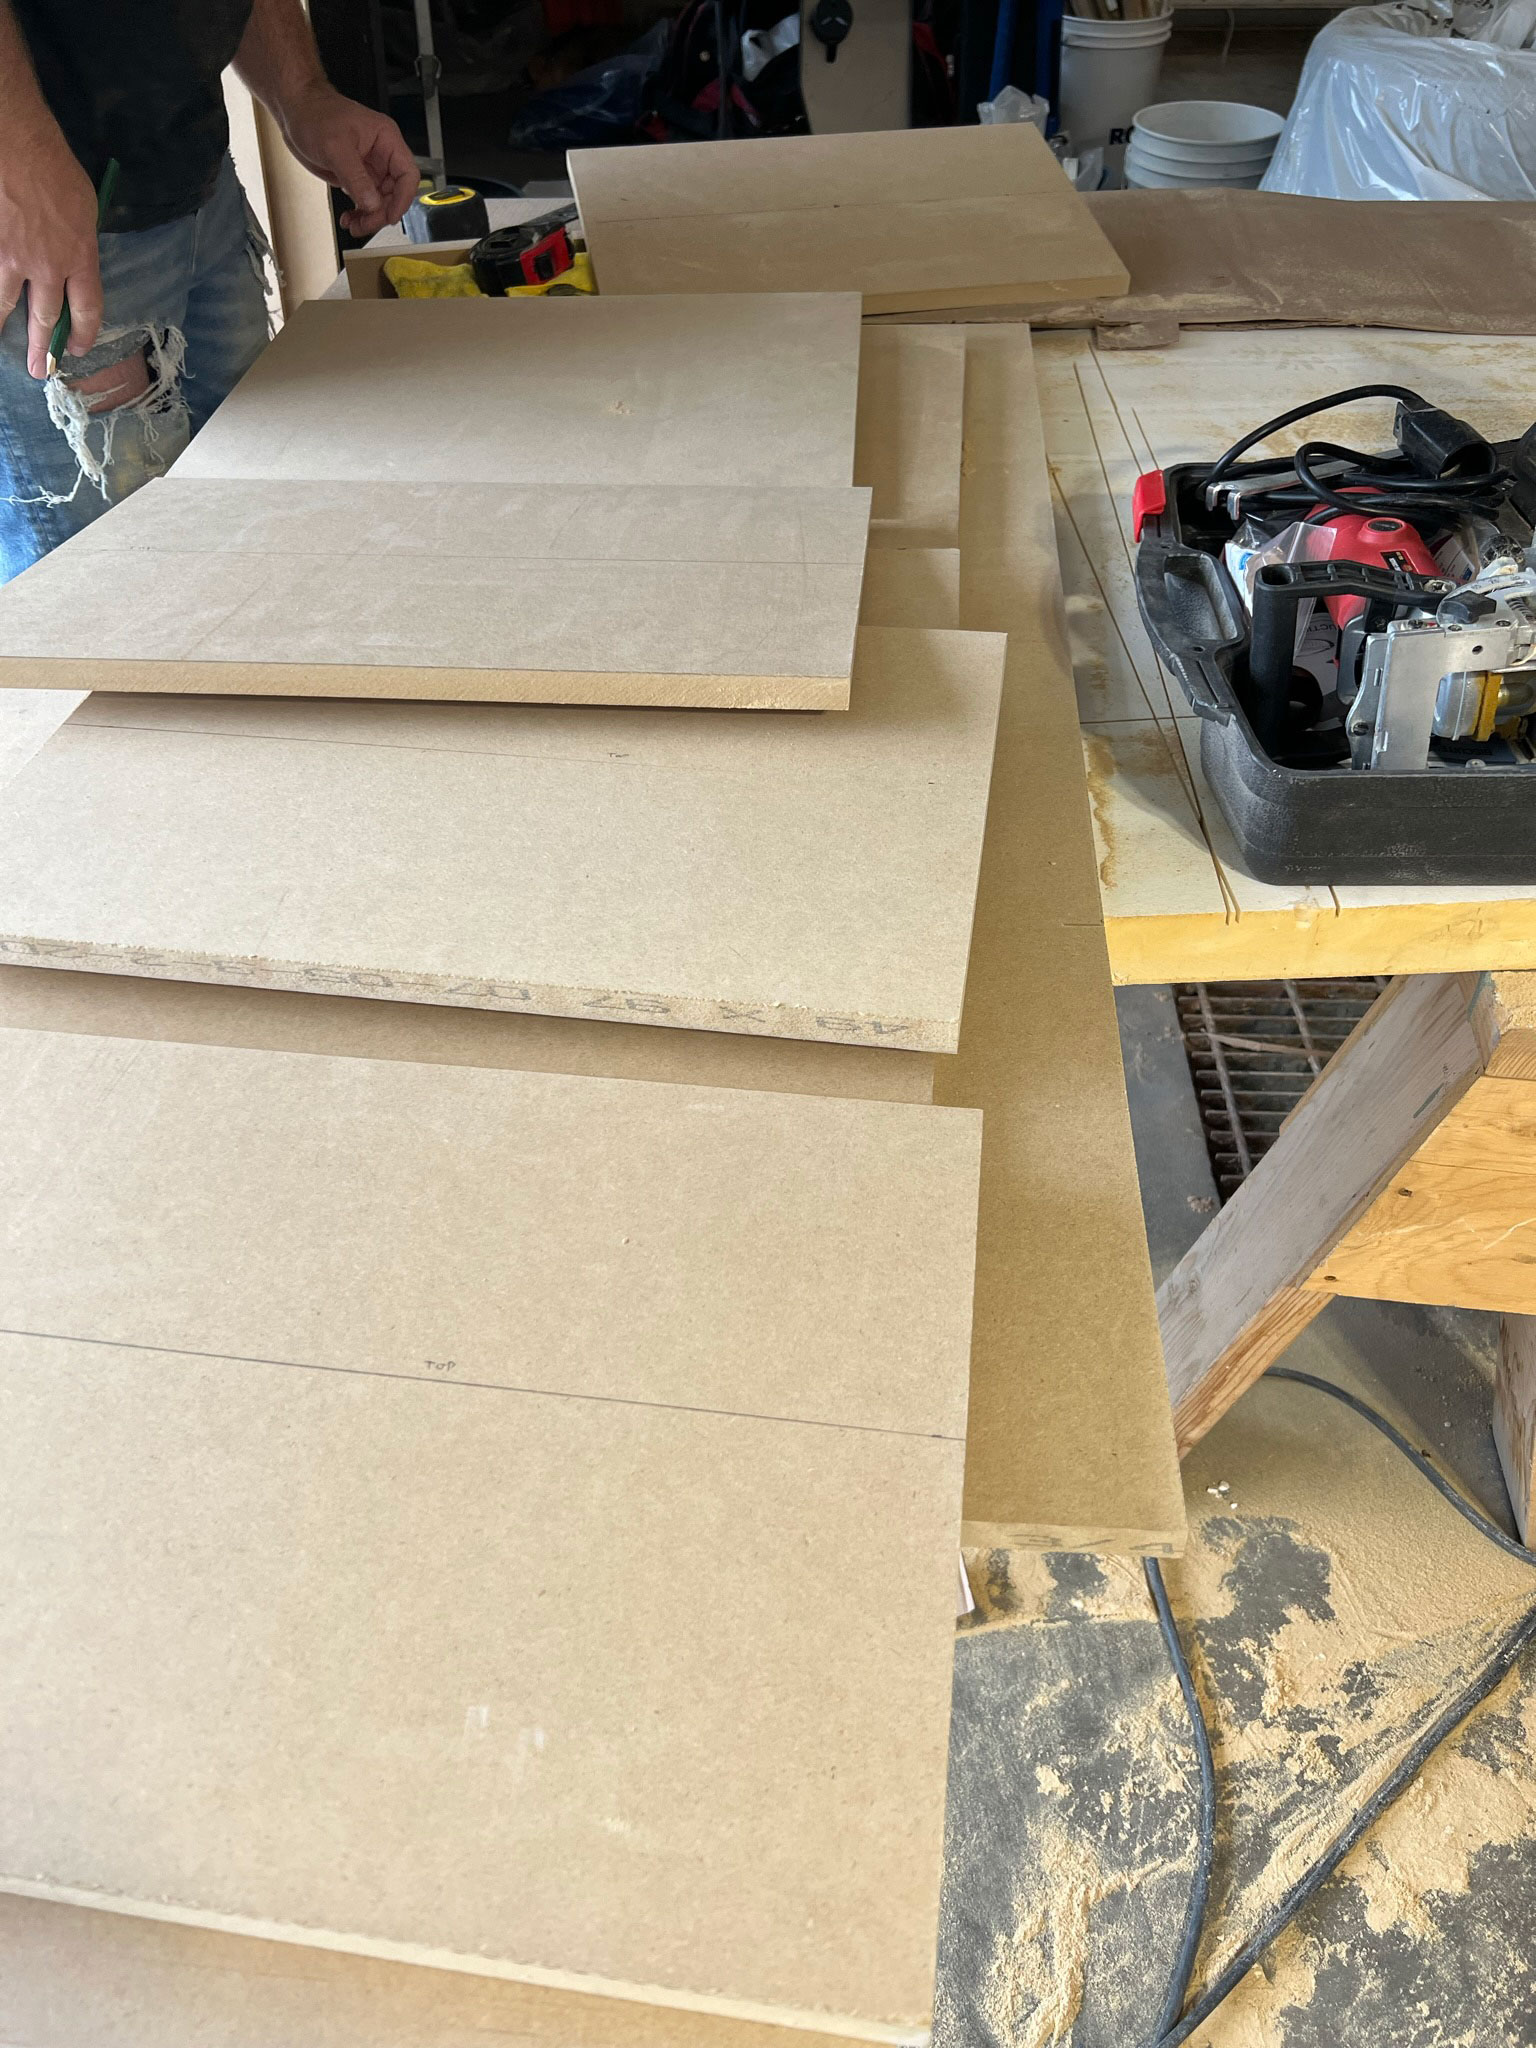 pieces cut out for bench seat in a pile